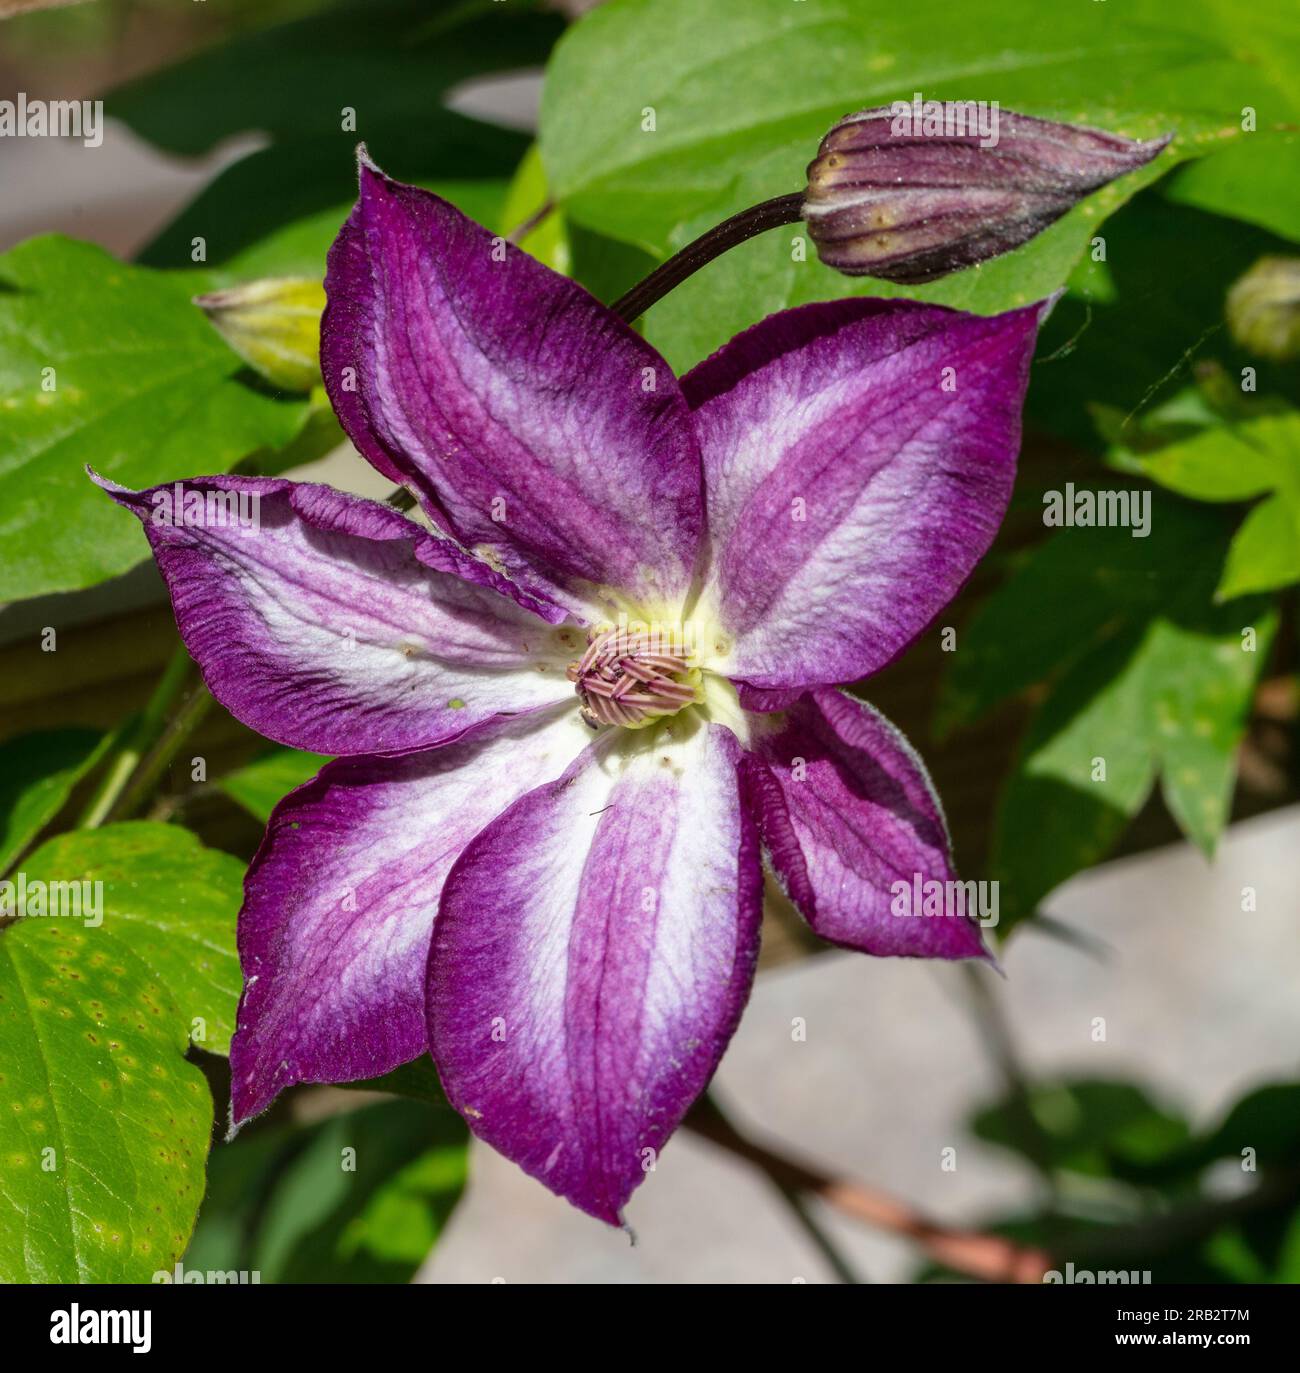 'Pernille' Purple clematis, Italiensk klematis (Clematis viticella) Stock Photo